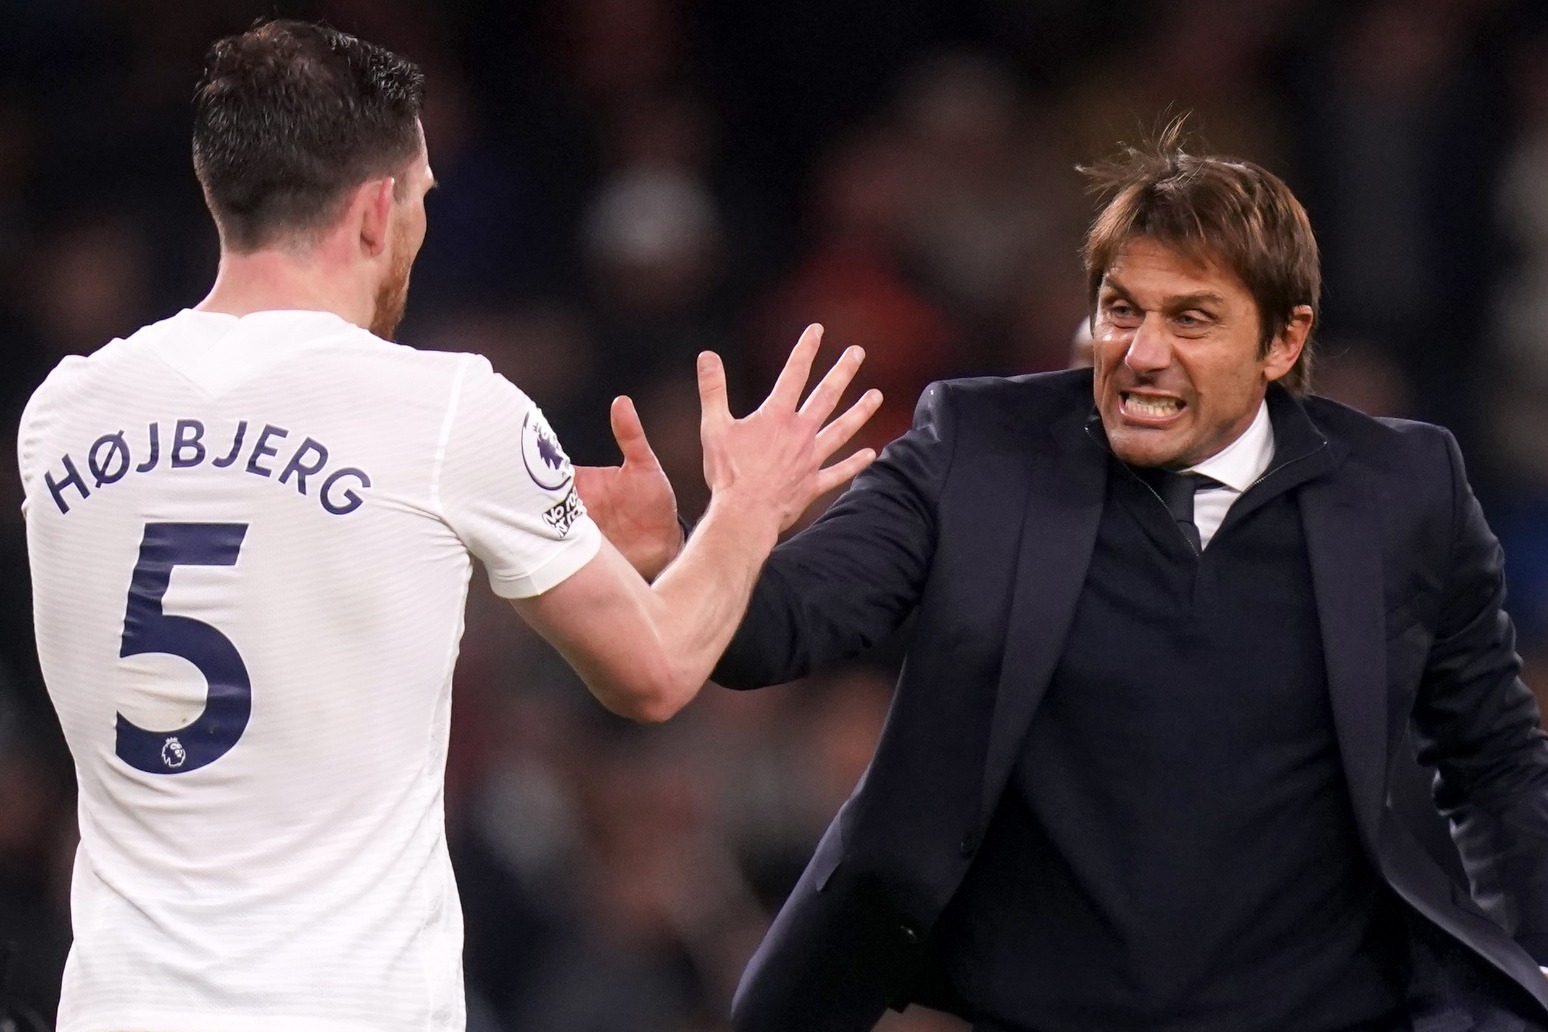 Pierre-Emile Hojbjerg calls on Antonio Conte to ‘elaborate’ after Spurs rant 